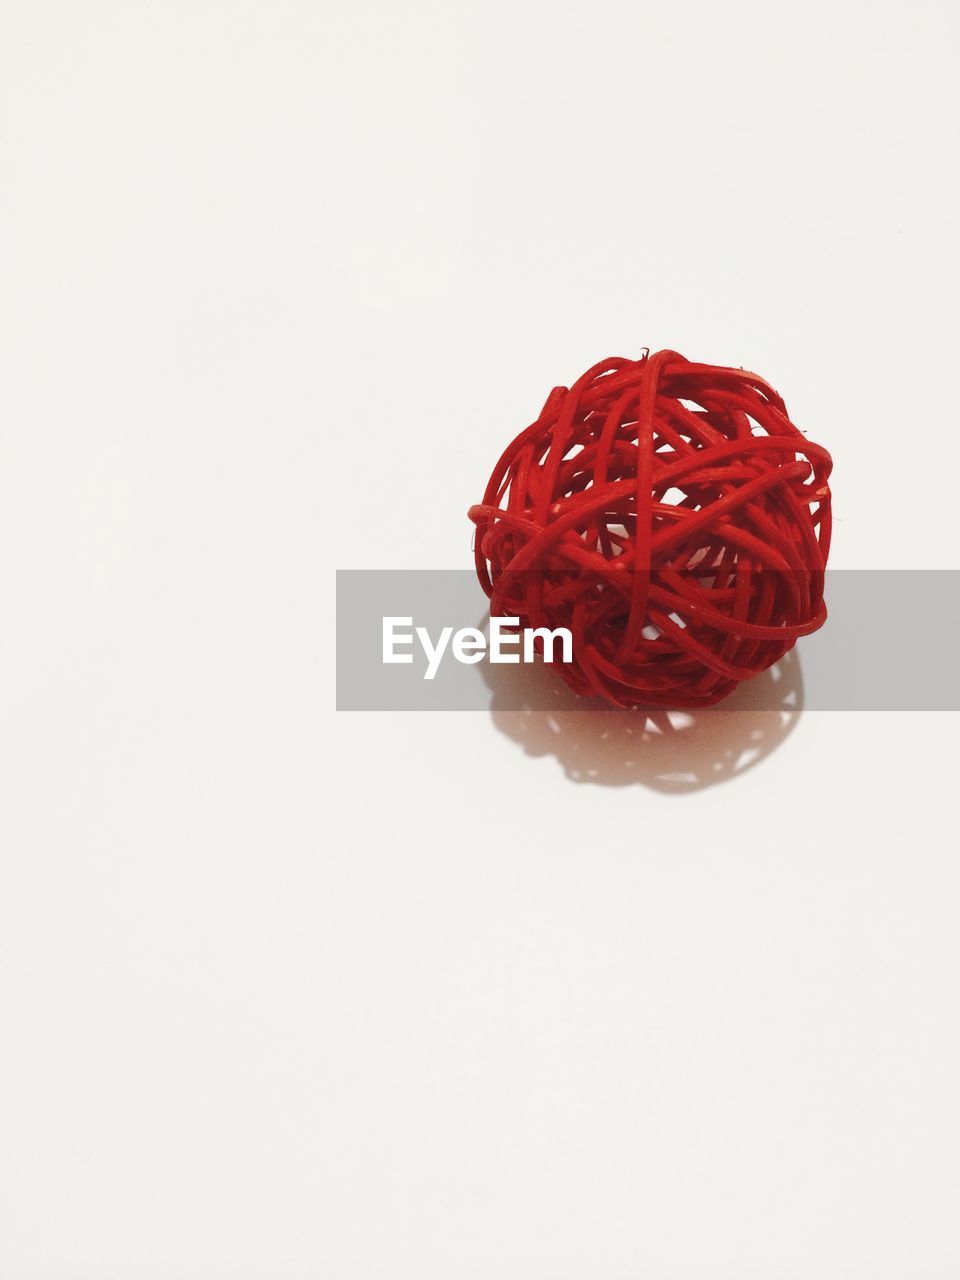 Red wicker ball over white background